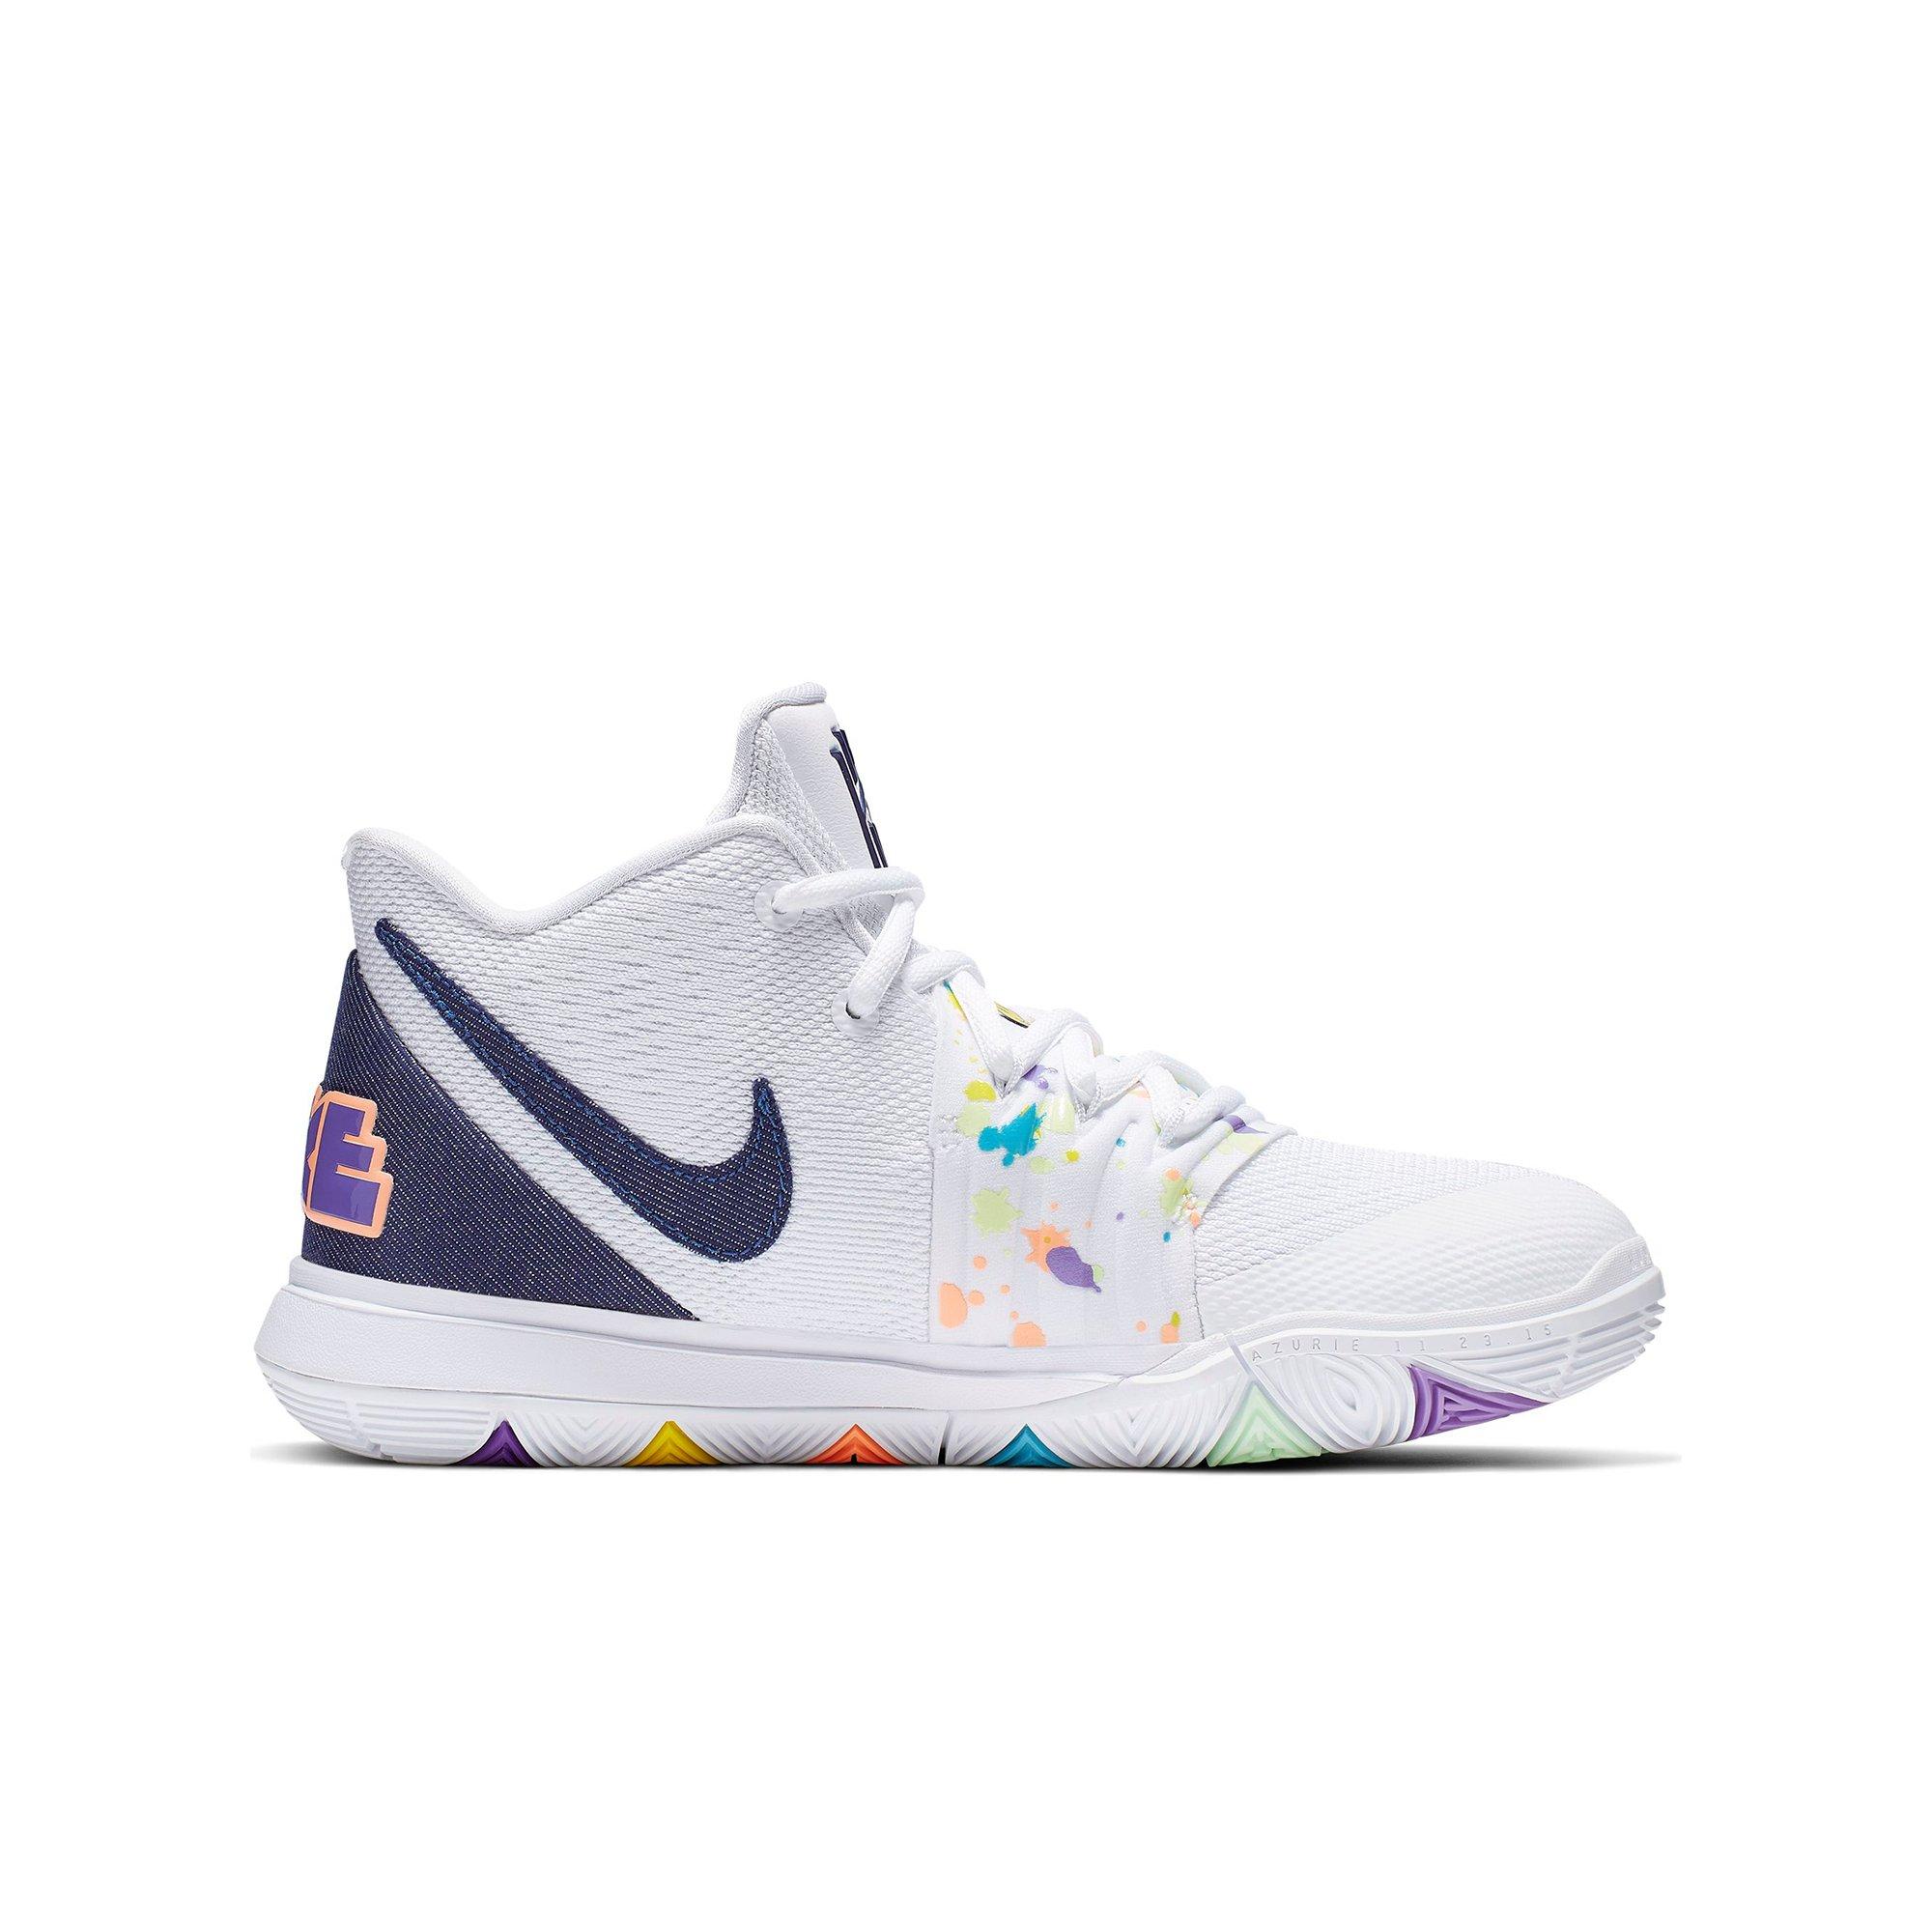 NIKE KYRIE 5 MAMBA MENTALITY HOW TO STYLE